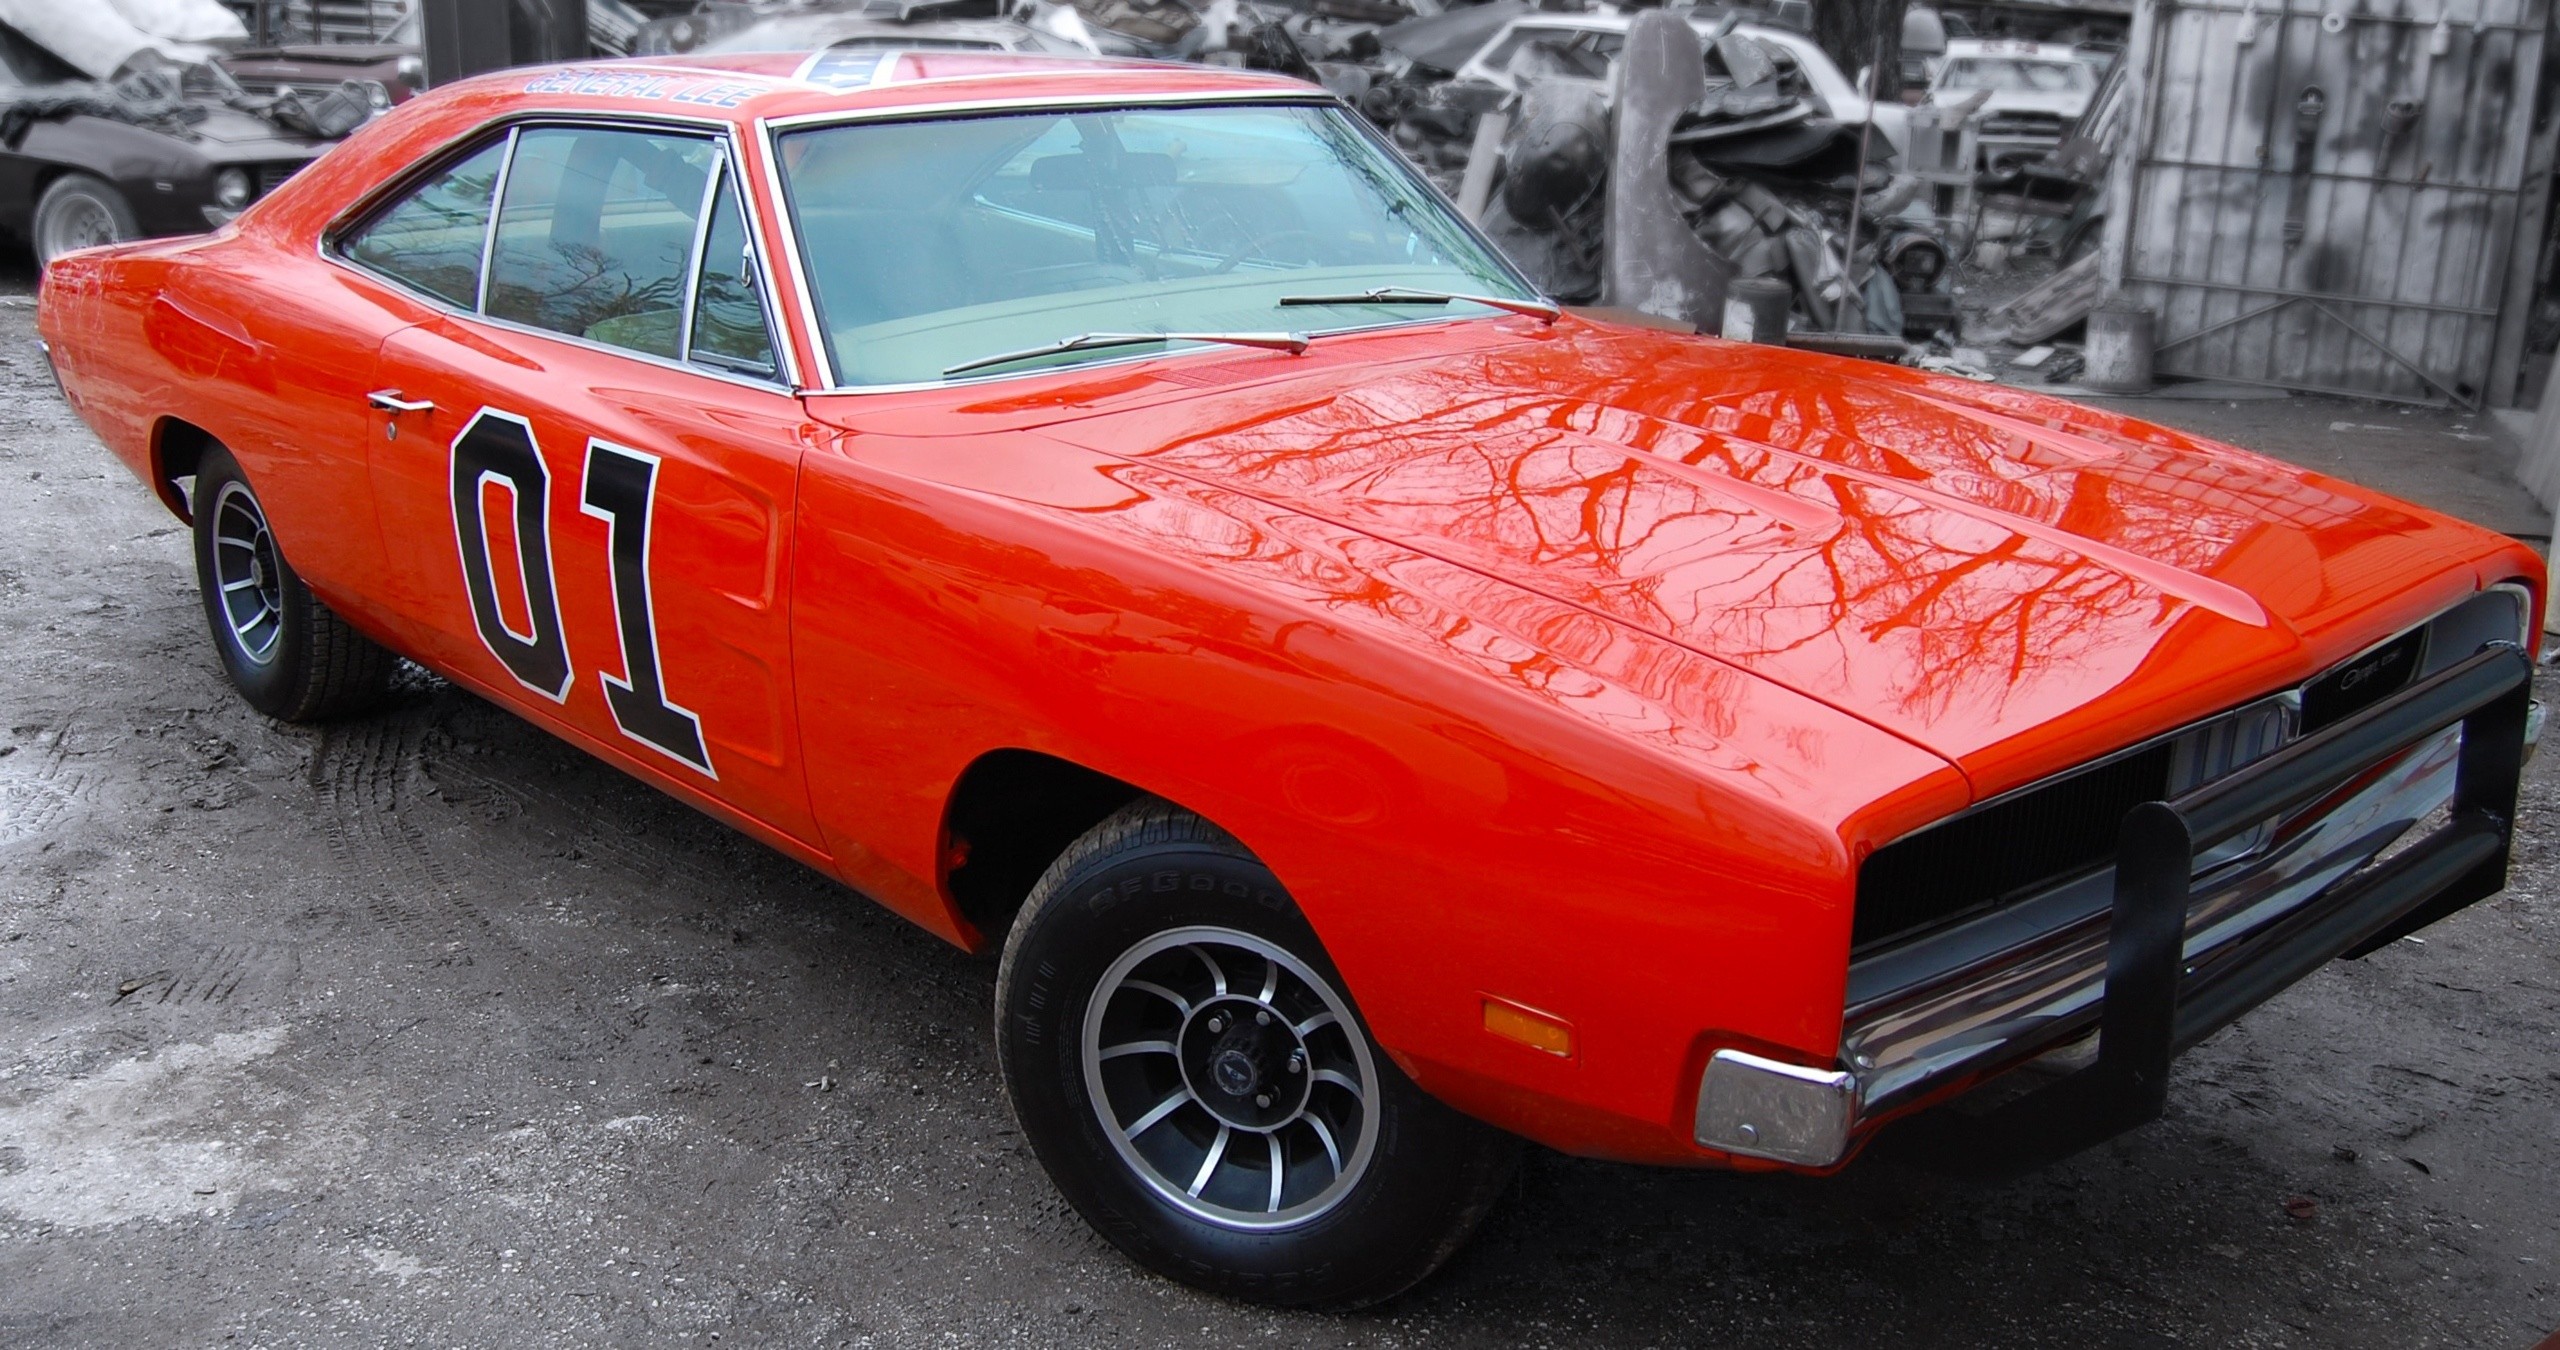 2560x1350 General Lee, Dodge Charger, Dodge, The Dukes of Hazzard